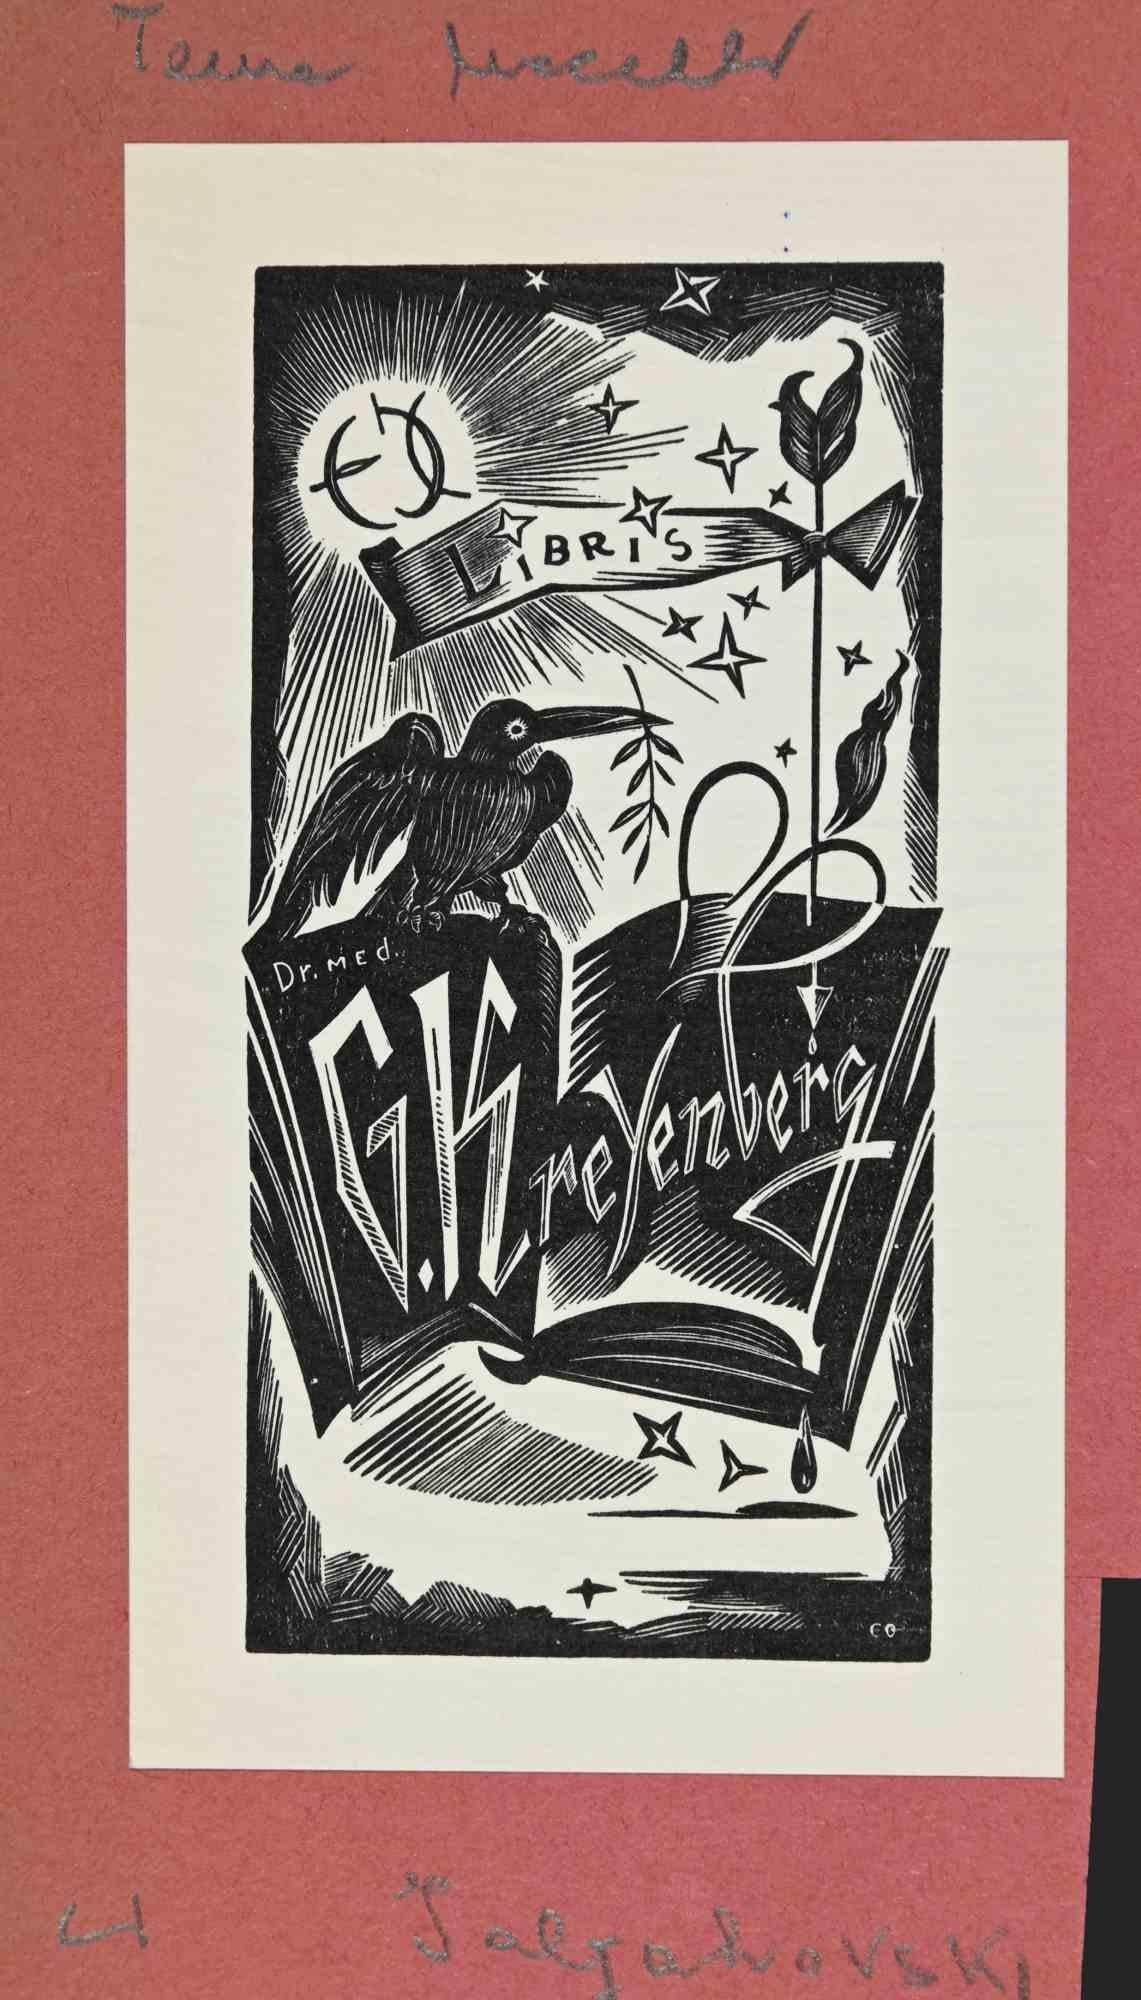 Ex libris - G. Kreyenberg is an Artwork realized in Mid 20th Century, by  M. Ialyahovski.

Woodcut print on ivory paper. Hand Signed on back. The work is glued on colored cardboard.

Total dimensions: 17.5x10.

Good conditions.

 The artwork